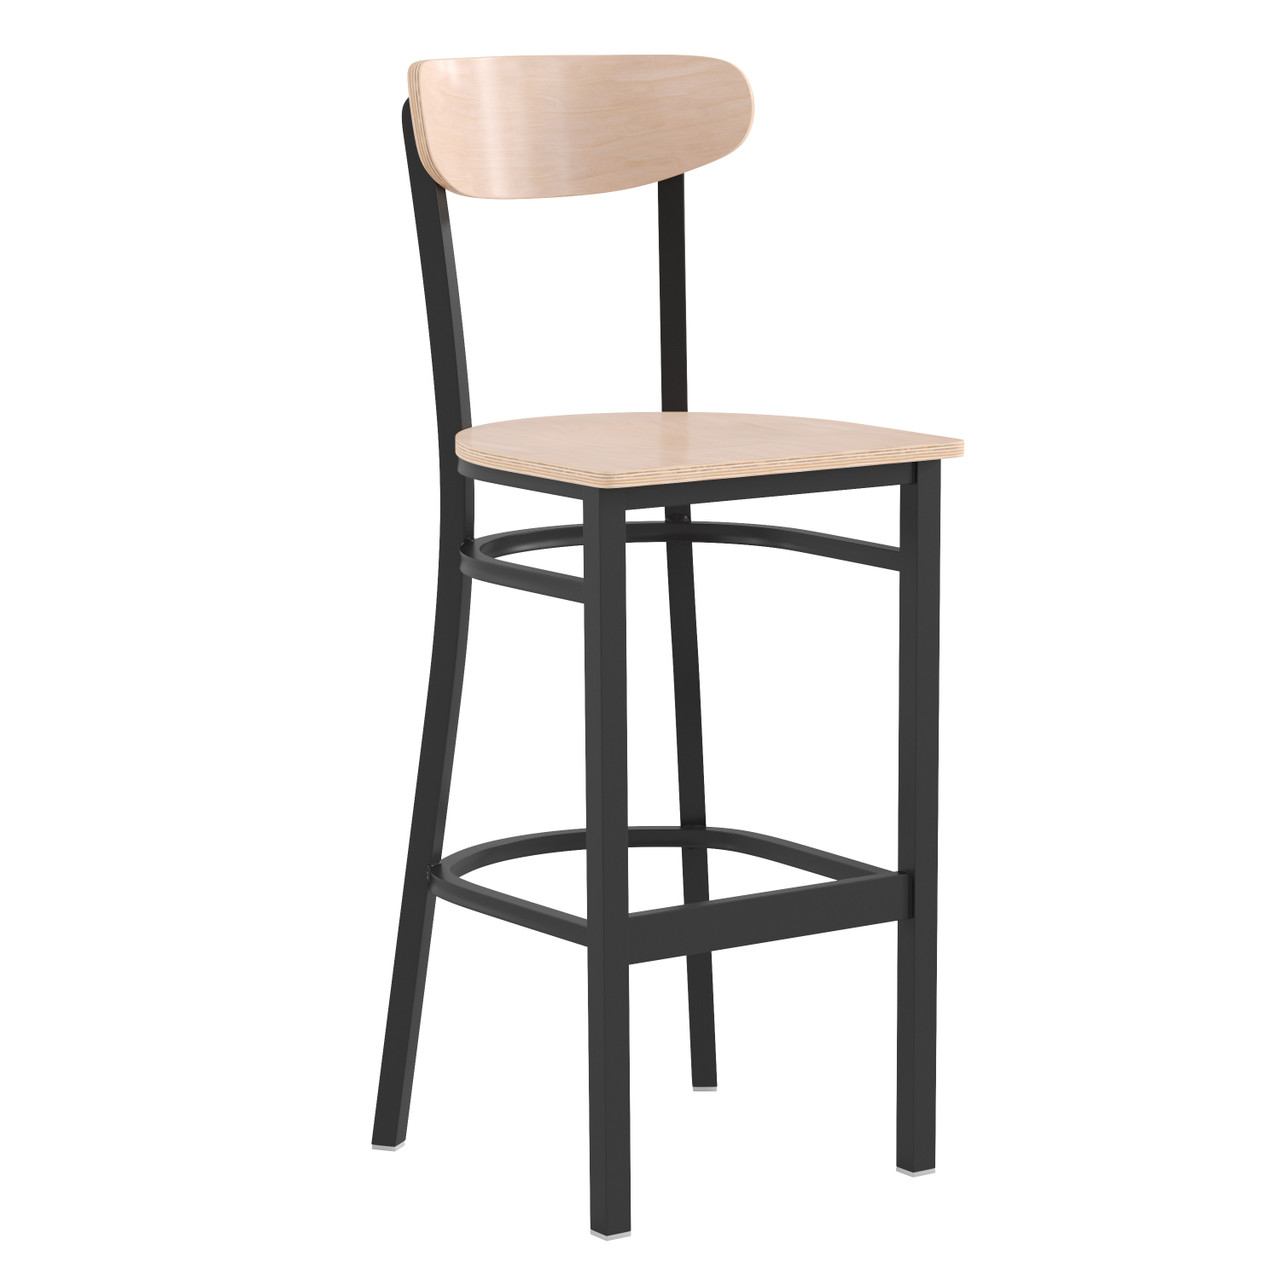 Flash Furniture Wright Commercial Grade Barstool w/ 500 LB. Capacity Black Steel Frame, Solid Wood Seat, & Boomerang Back, Natural Birch Finish,